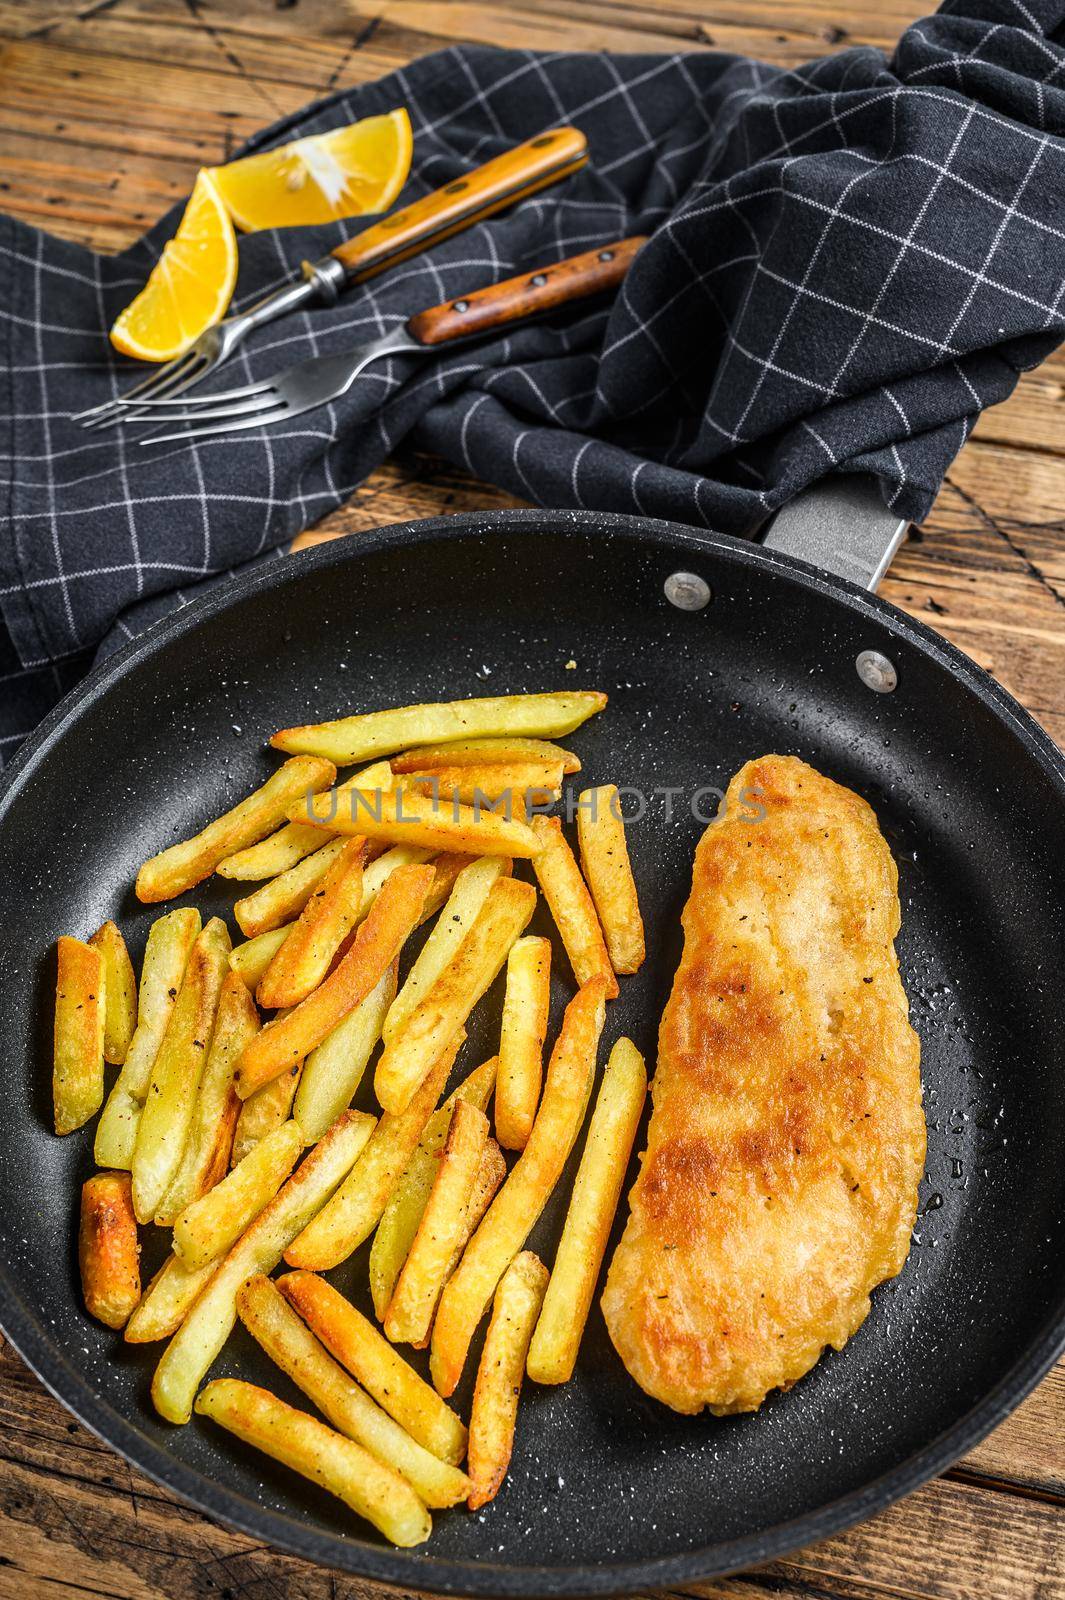 English Traditional Fish and chips dish in a pan. Wooden background. Top view by Composter